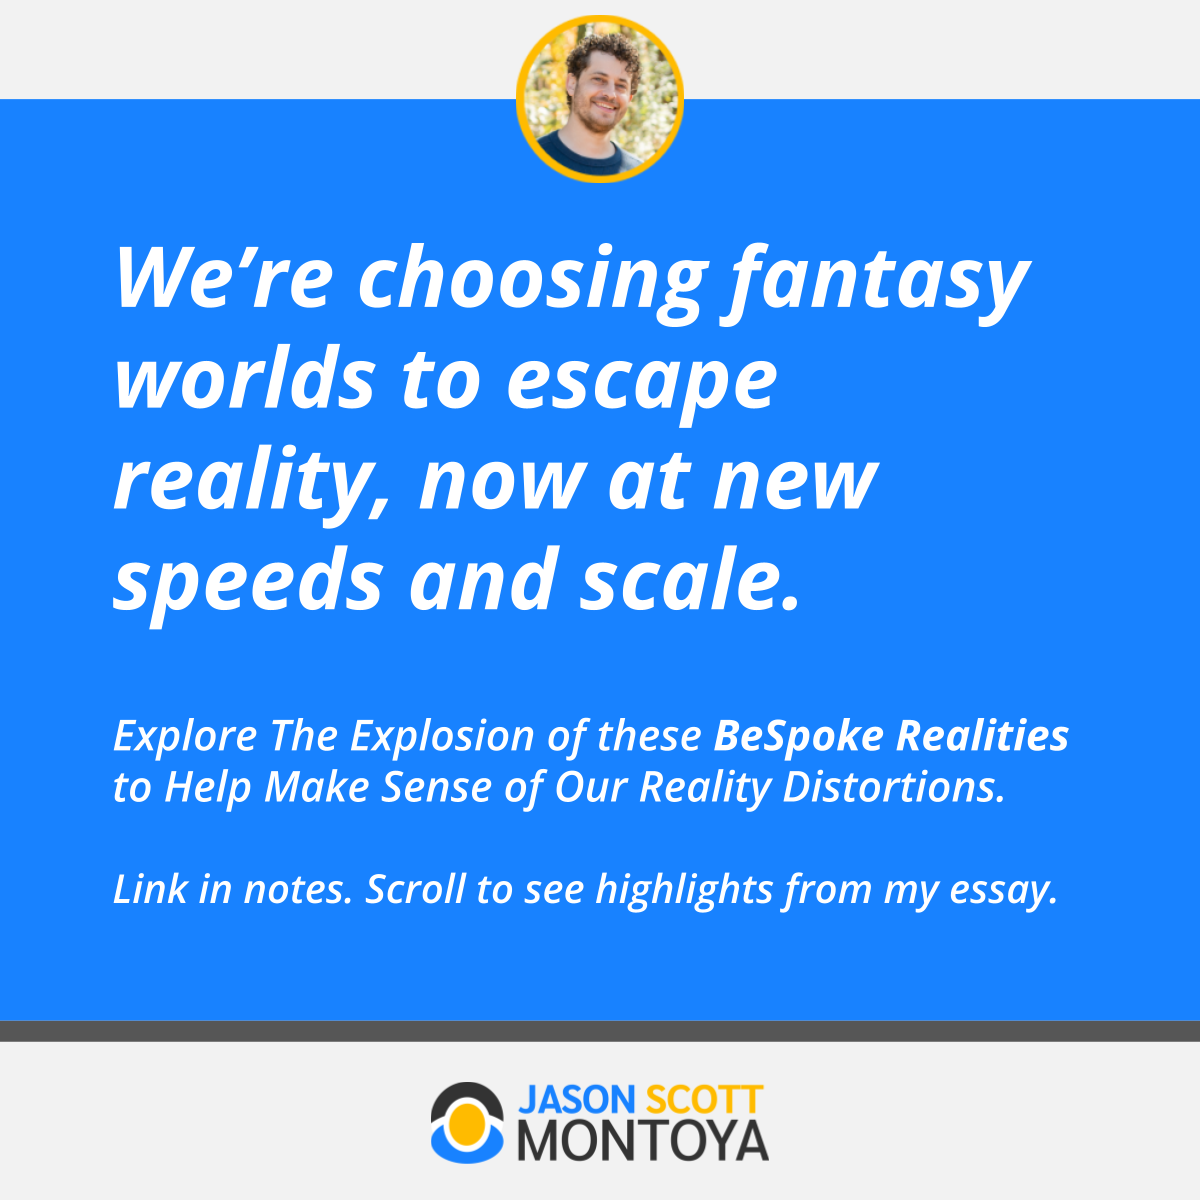 We’re choosing fantasy worlds to escape reality, now at new speeds and scale.   Explore The Explosion of these BeSpoke Realities to Help Make Sense of Our Reality Distortions.  Link in notes. Scroll to see highlights from my essay.